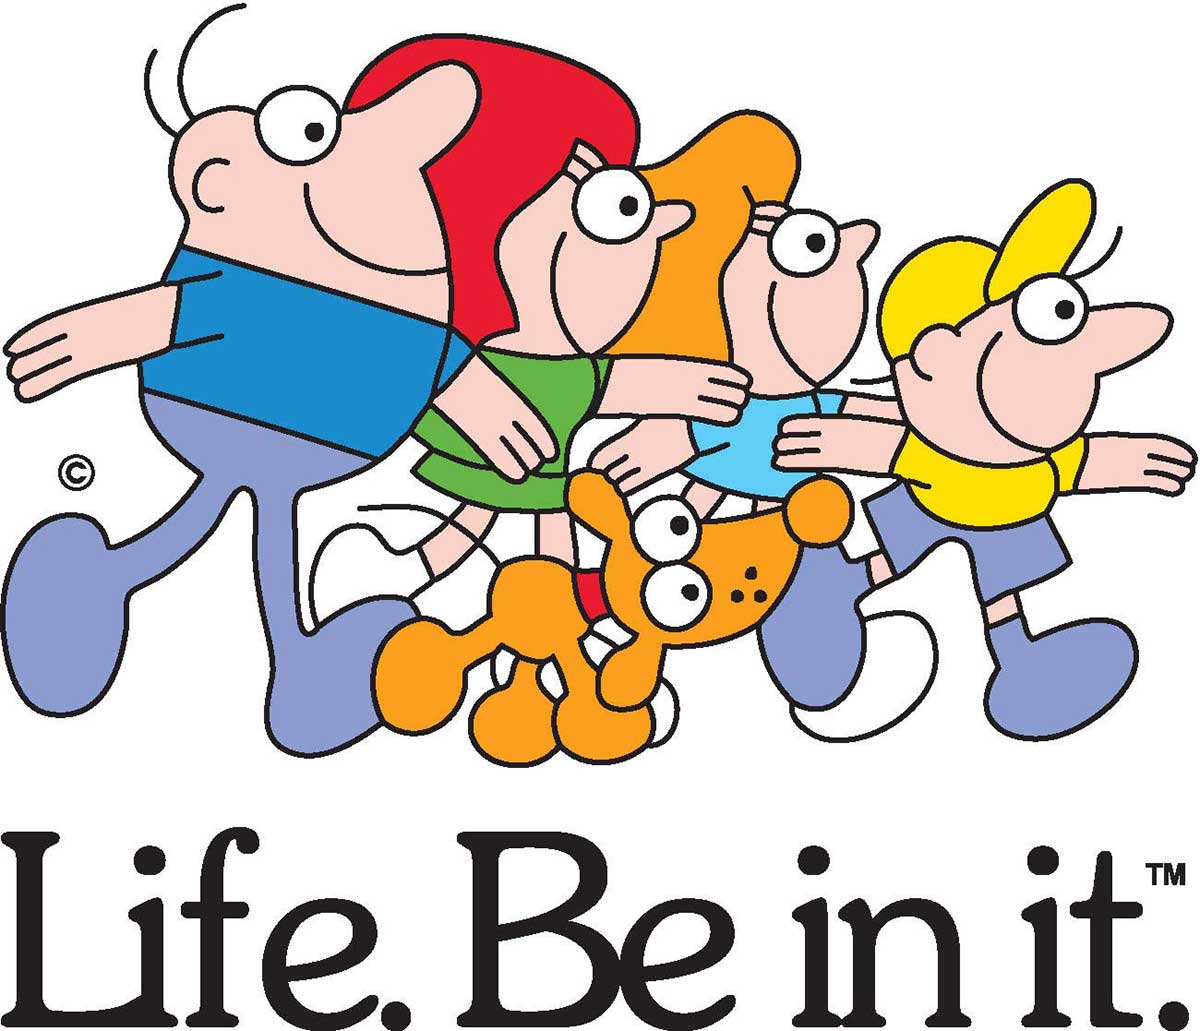 Life. Be in it. logo.